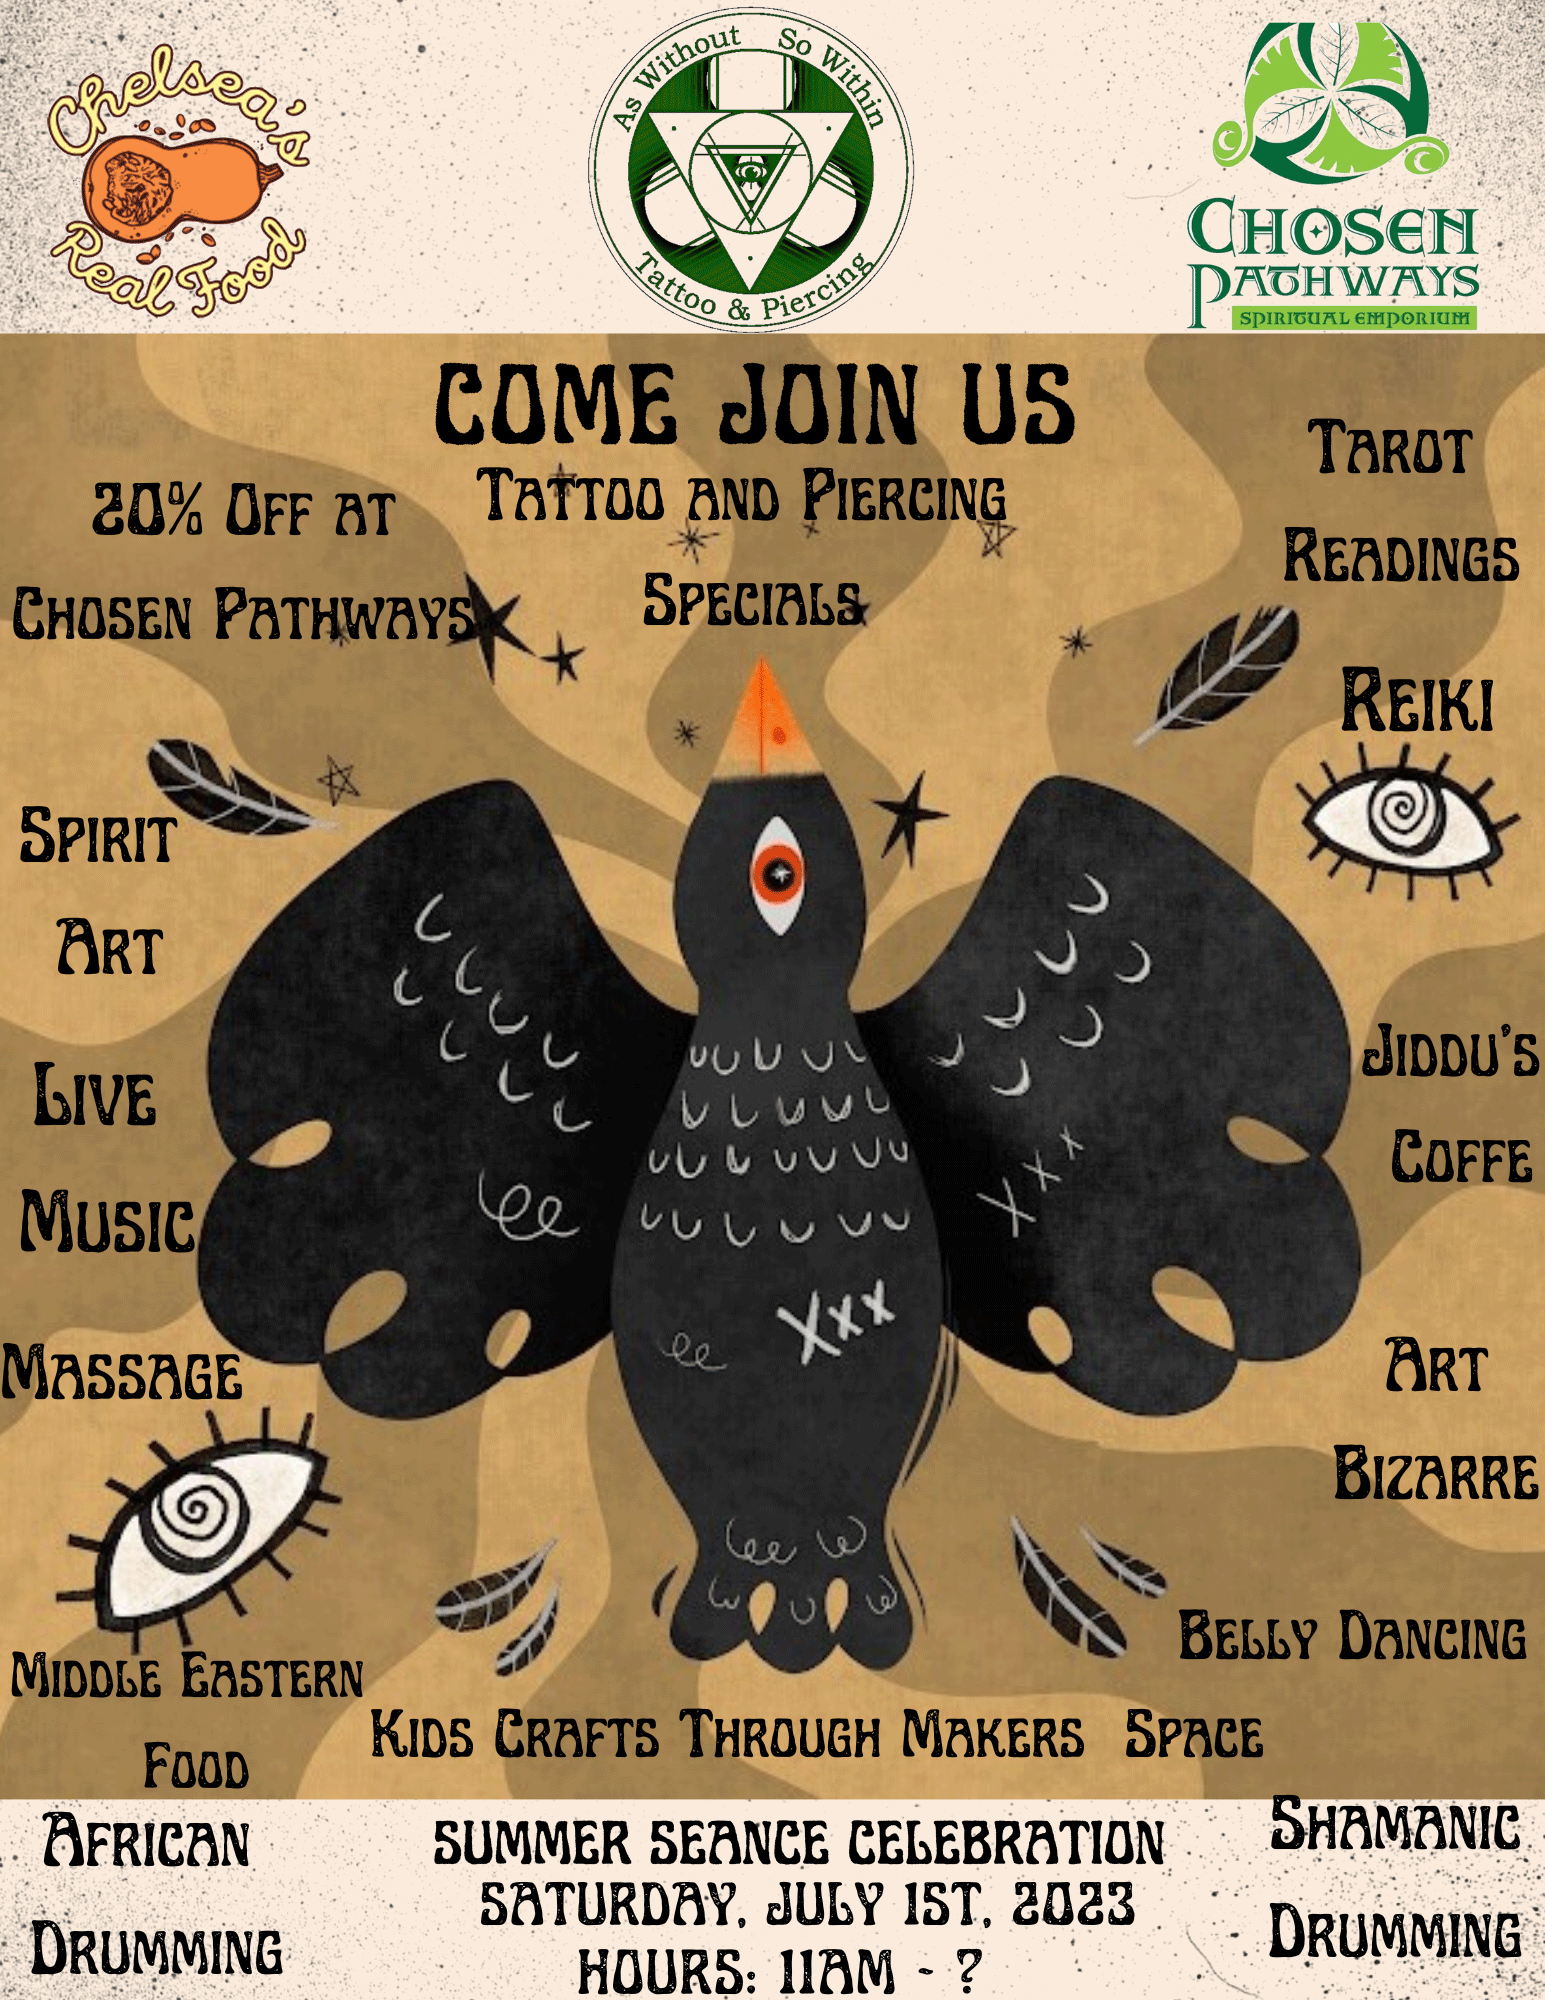 A flyer for the Summer Seance event. The information is in the body of this event listing. The flyer has an illustration of a simplified crow in the middle.